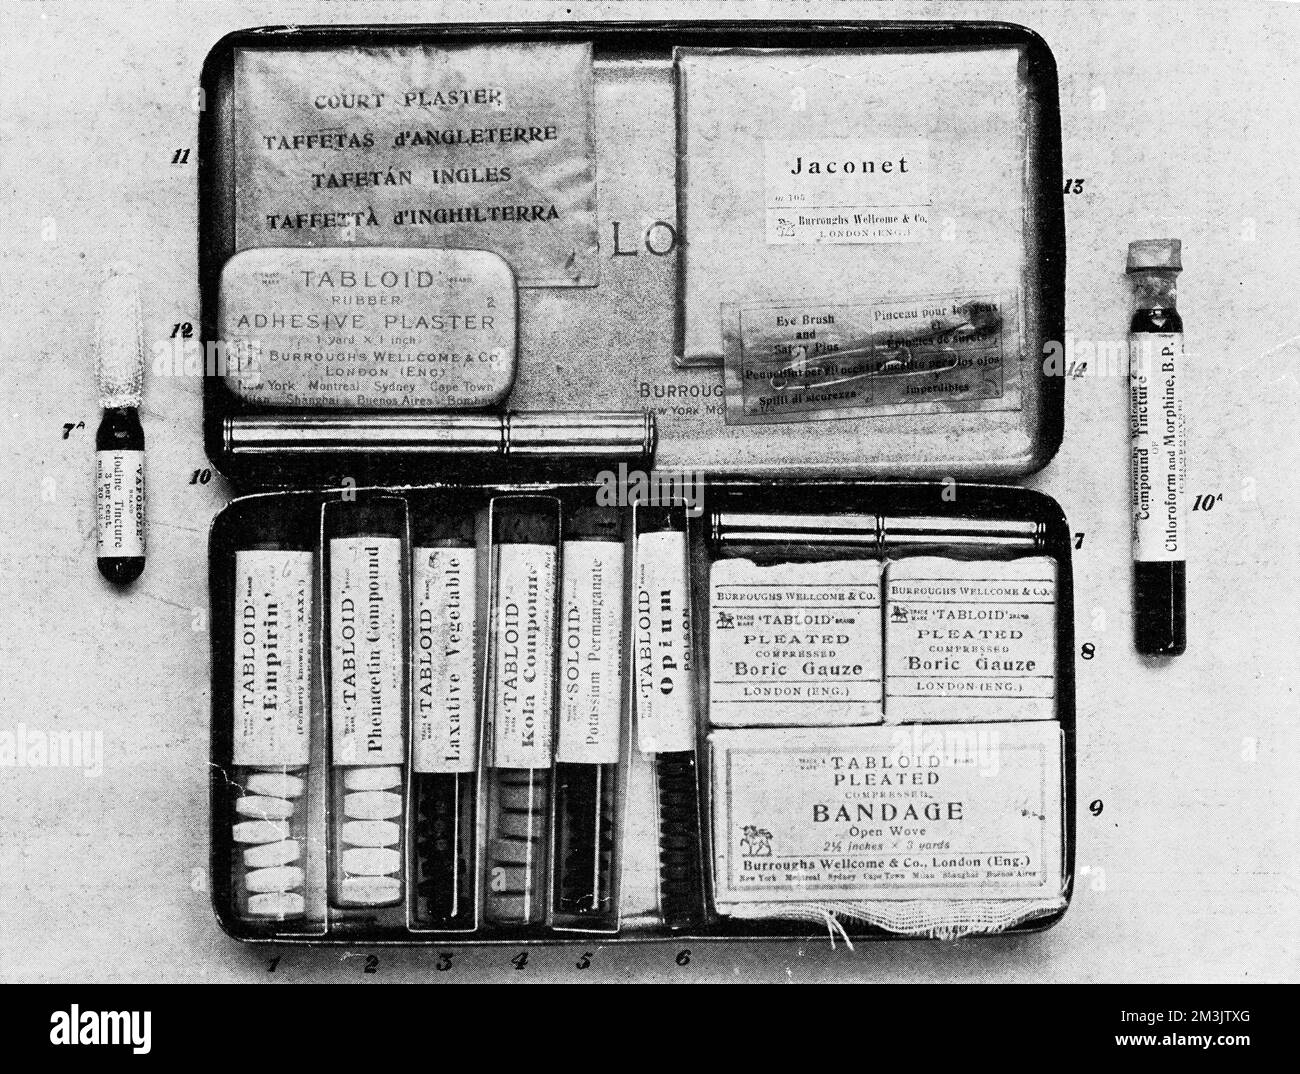 Medical equipment in a handy portable case made for soldiers, war correspondents, airmen and explorers. The kit contains Kola compound that supresses hunger and thirst. There are also various antiseptic ointments and bandages enclosed, essential for quick recoveries.     Date: 1915 Stock Photo